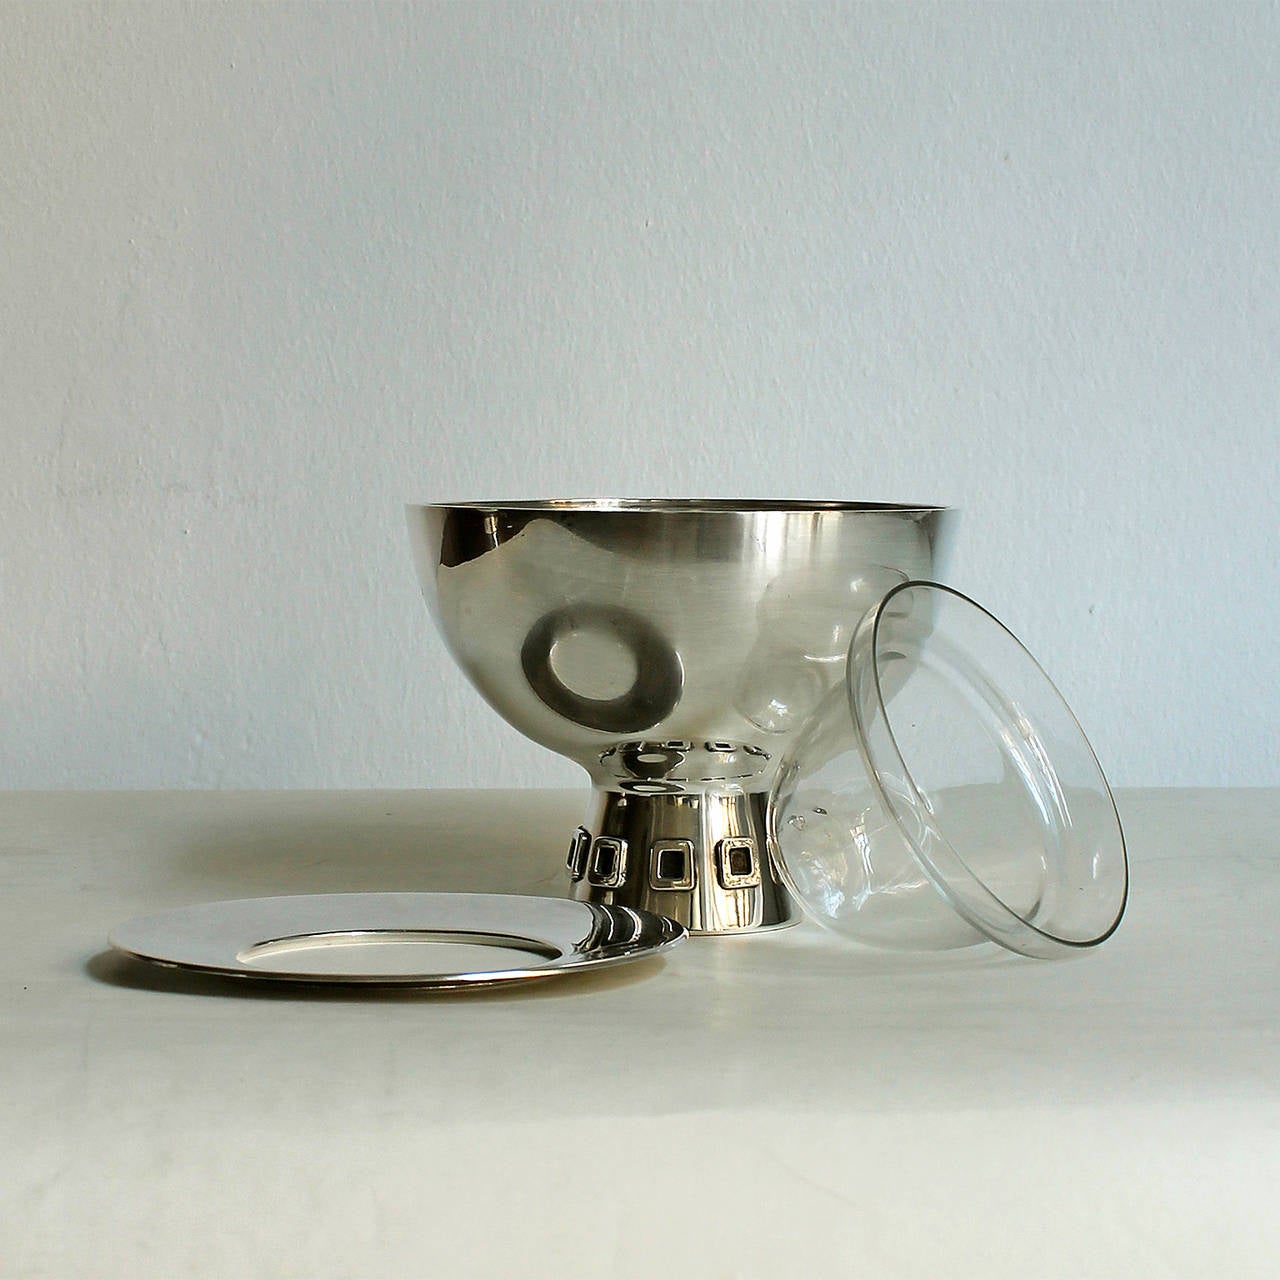 Mid-20th Century Pair of Mid-Century Modern Silver Caviar Bowls by Puig Doria - Spain For Sale